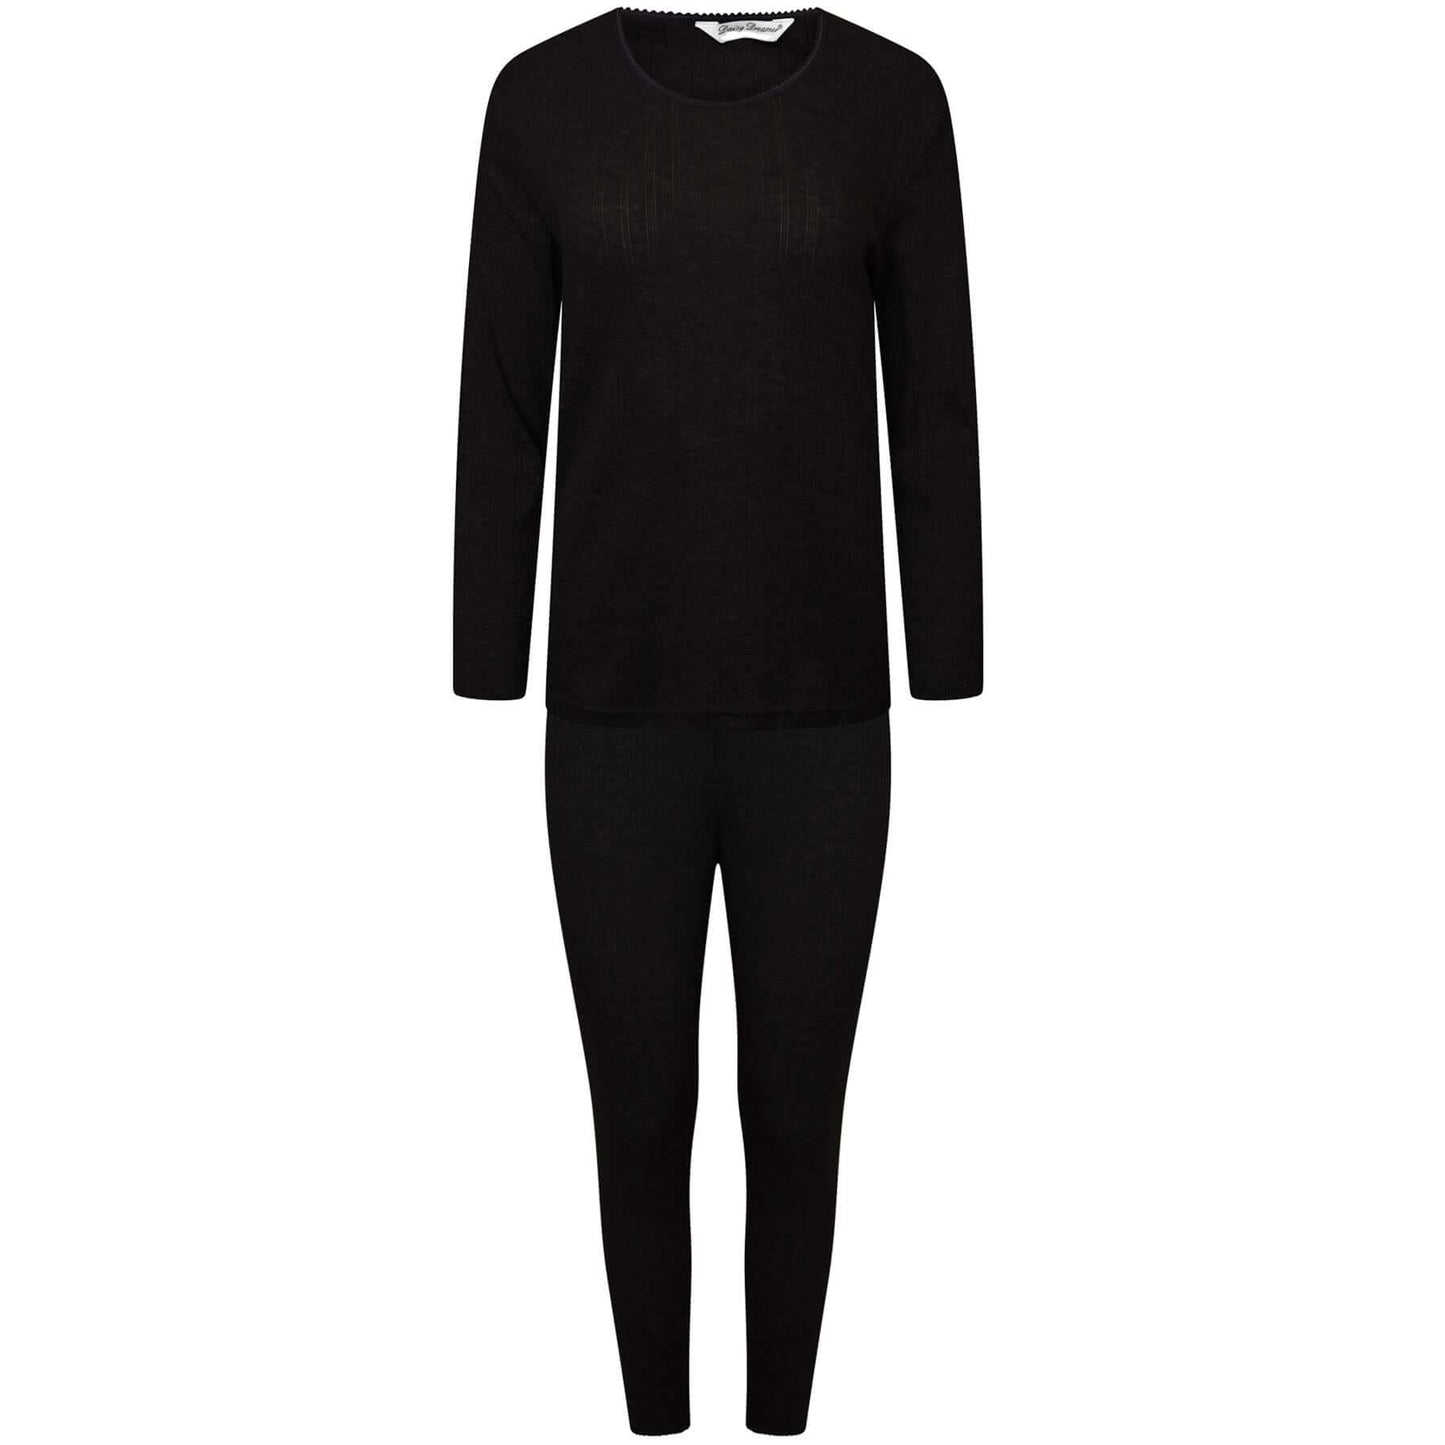 Heatwave® Girls Thermal Long Sleeve Top & Pants Sets, Kids Baselayer Sets. Buy now for £7.00. A Thermal Underwear by Daisy Dreamer. baselayer, black, bottom, childrens, daisy dreamer, girls, grey, heatwave, hiking, leggings, long johns, long sleeve, marl